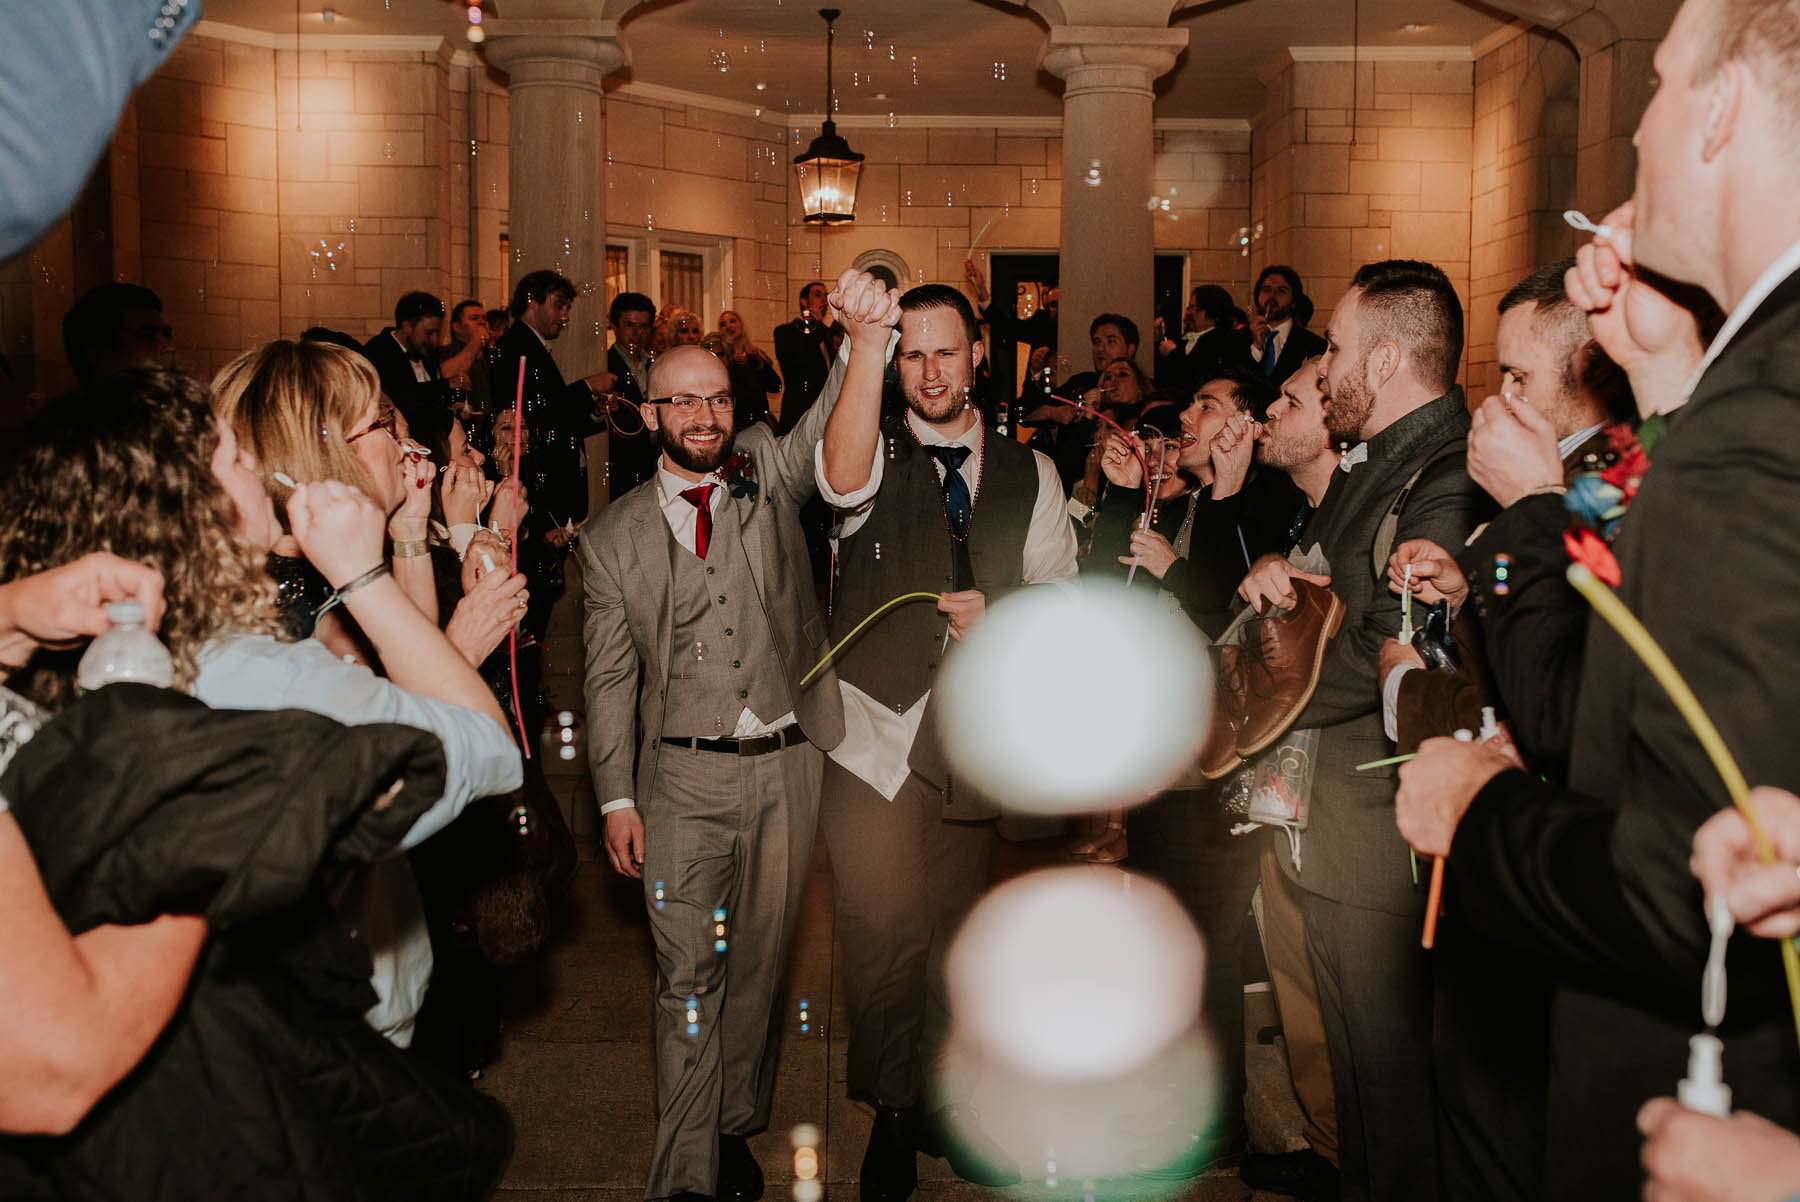 The newlyweds walk down an aisle of their friends and family blowing bubbles and waving glowsticks as they leave the venue.